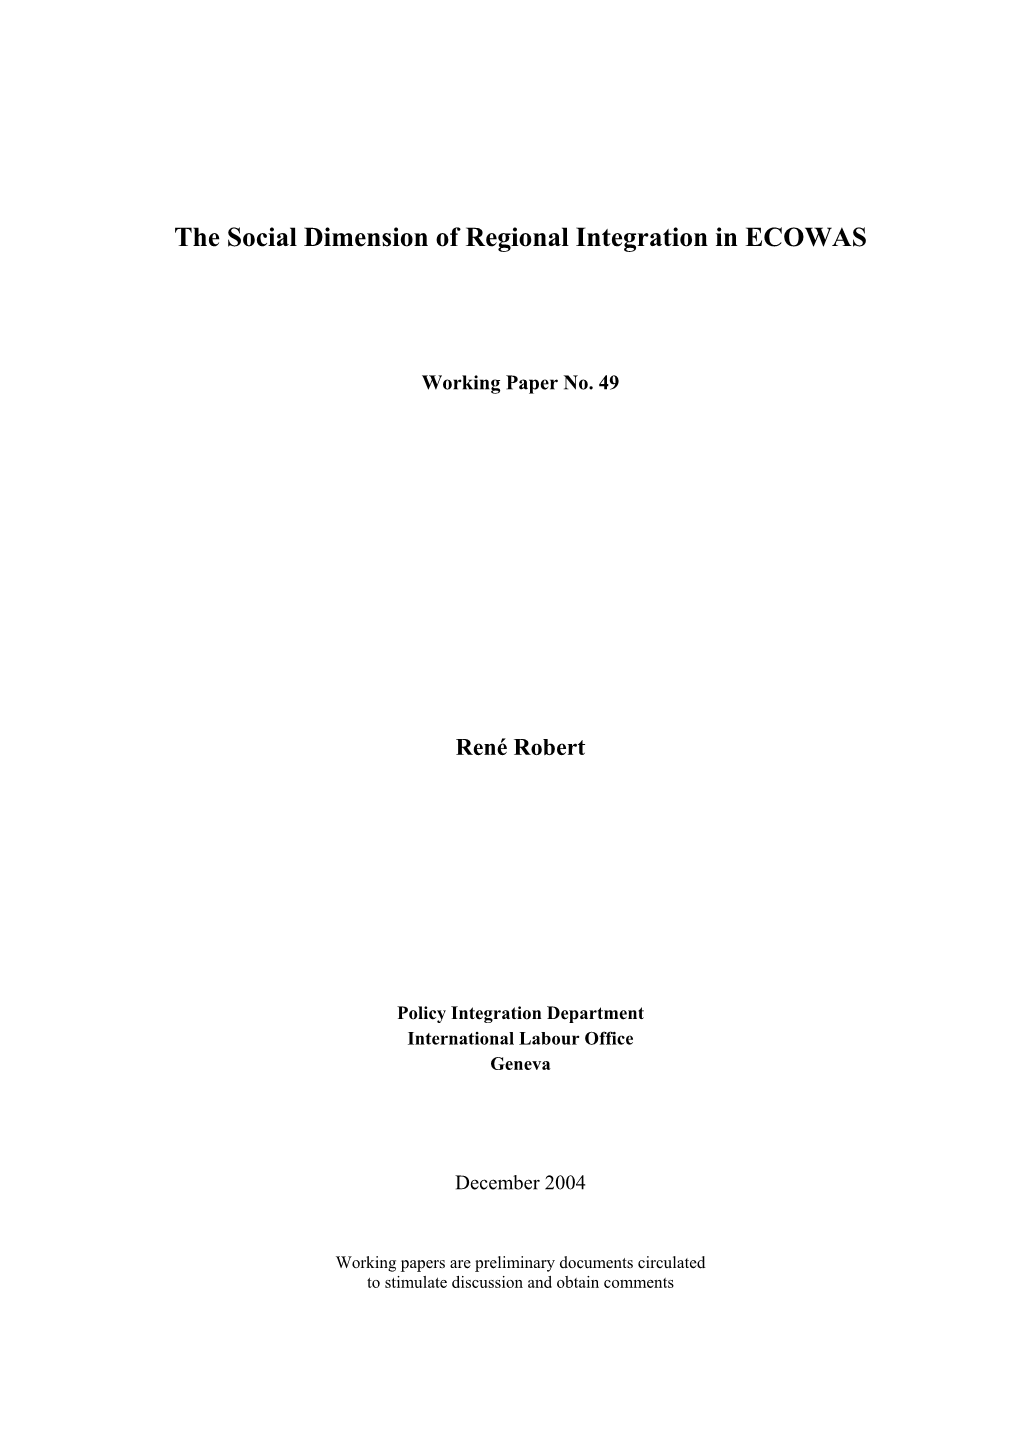 The Social Dimension of Regional Integration in ECOWAS